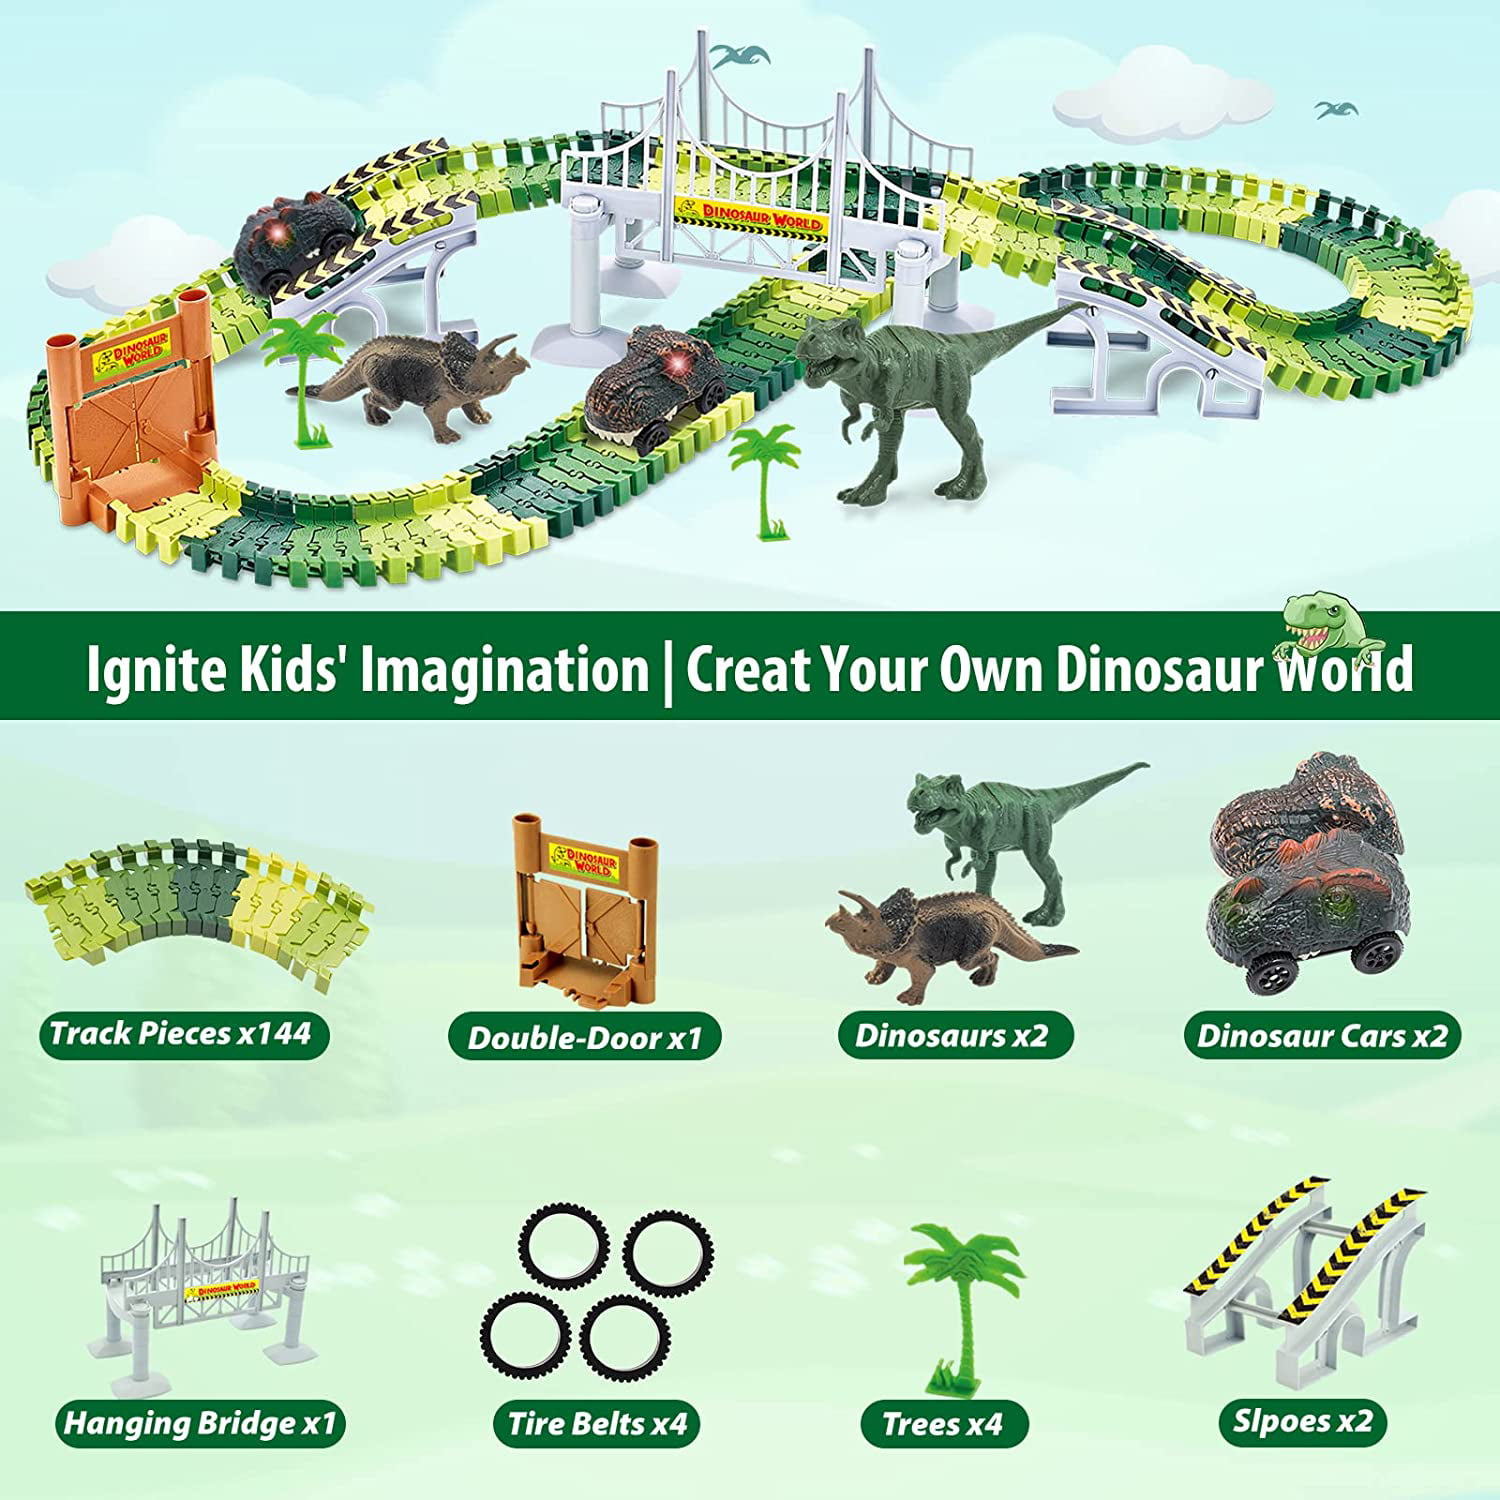  Dinosaur World Race Track Toys for Kids - Best Birthday Gifts  for Age 3 4 5 6 7 Year Old Boys and Girls, PREPOP Deluxe Dino Sets, 220 pcs  : Toys & Games